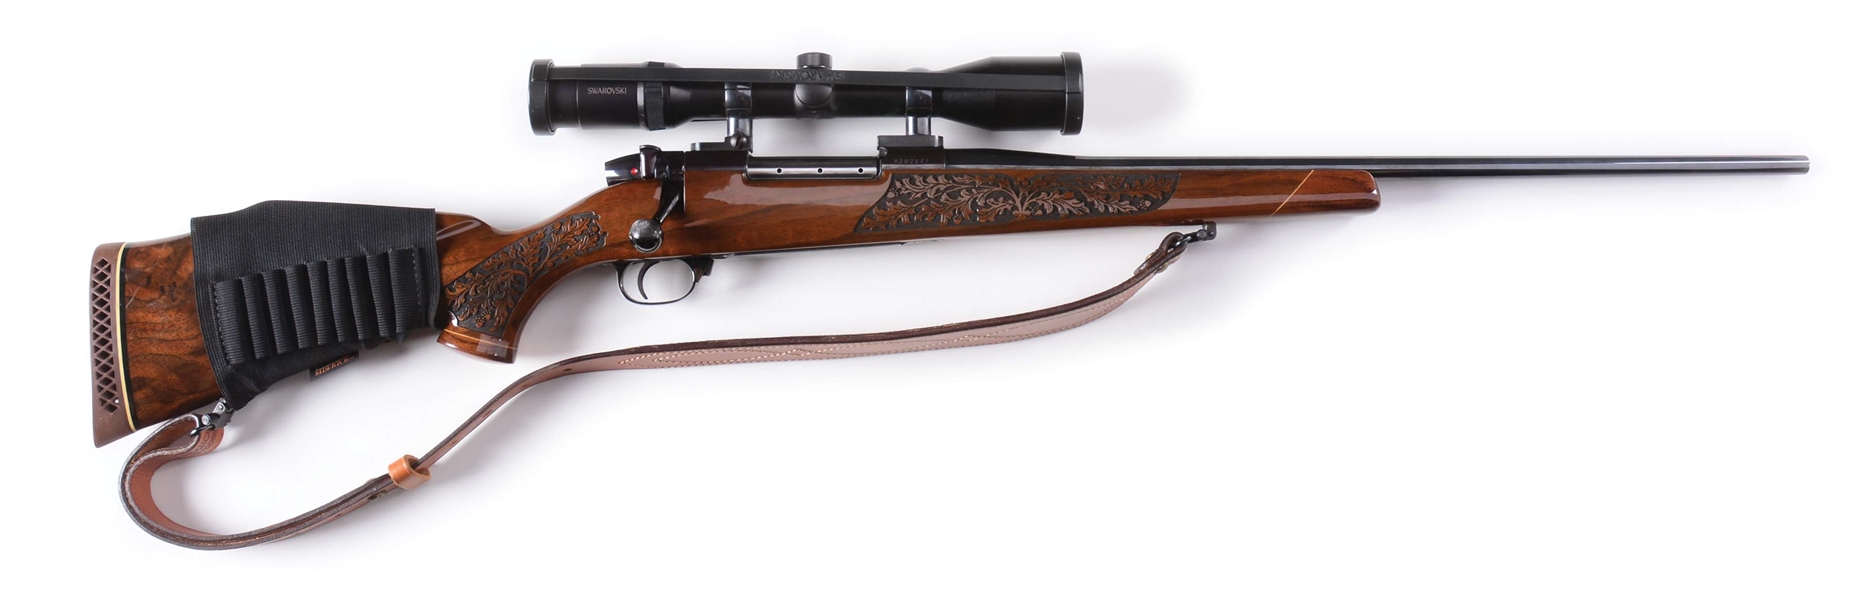 (M) WEATHER MARK V BOLT ACTION RIFLE WITH SWAROVSKI SCOPE (7MM WBY MAG).